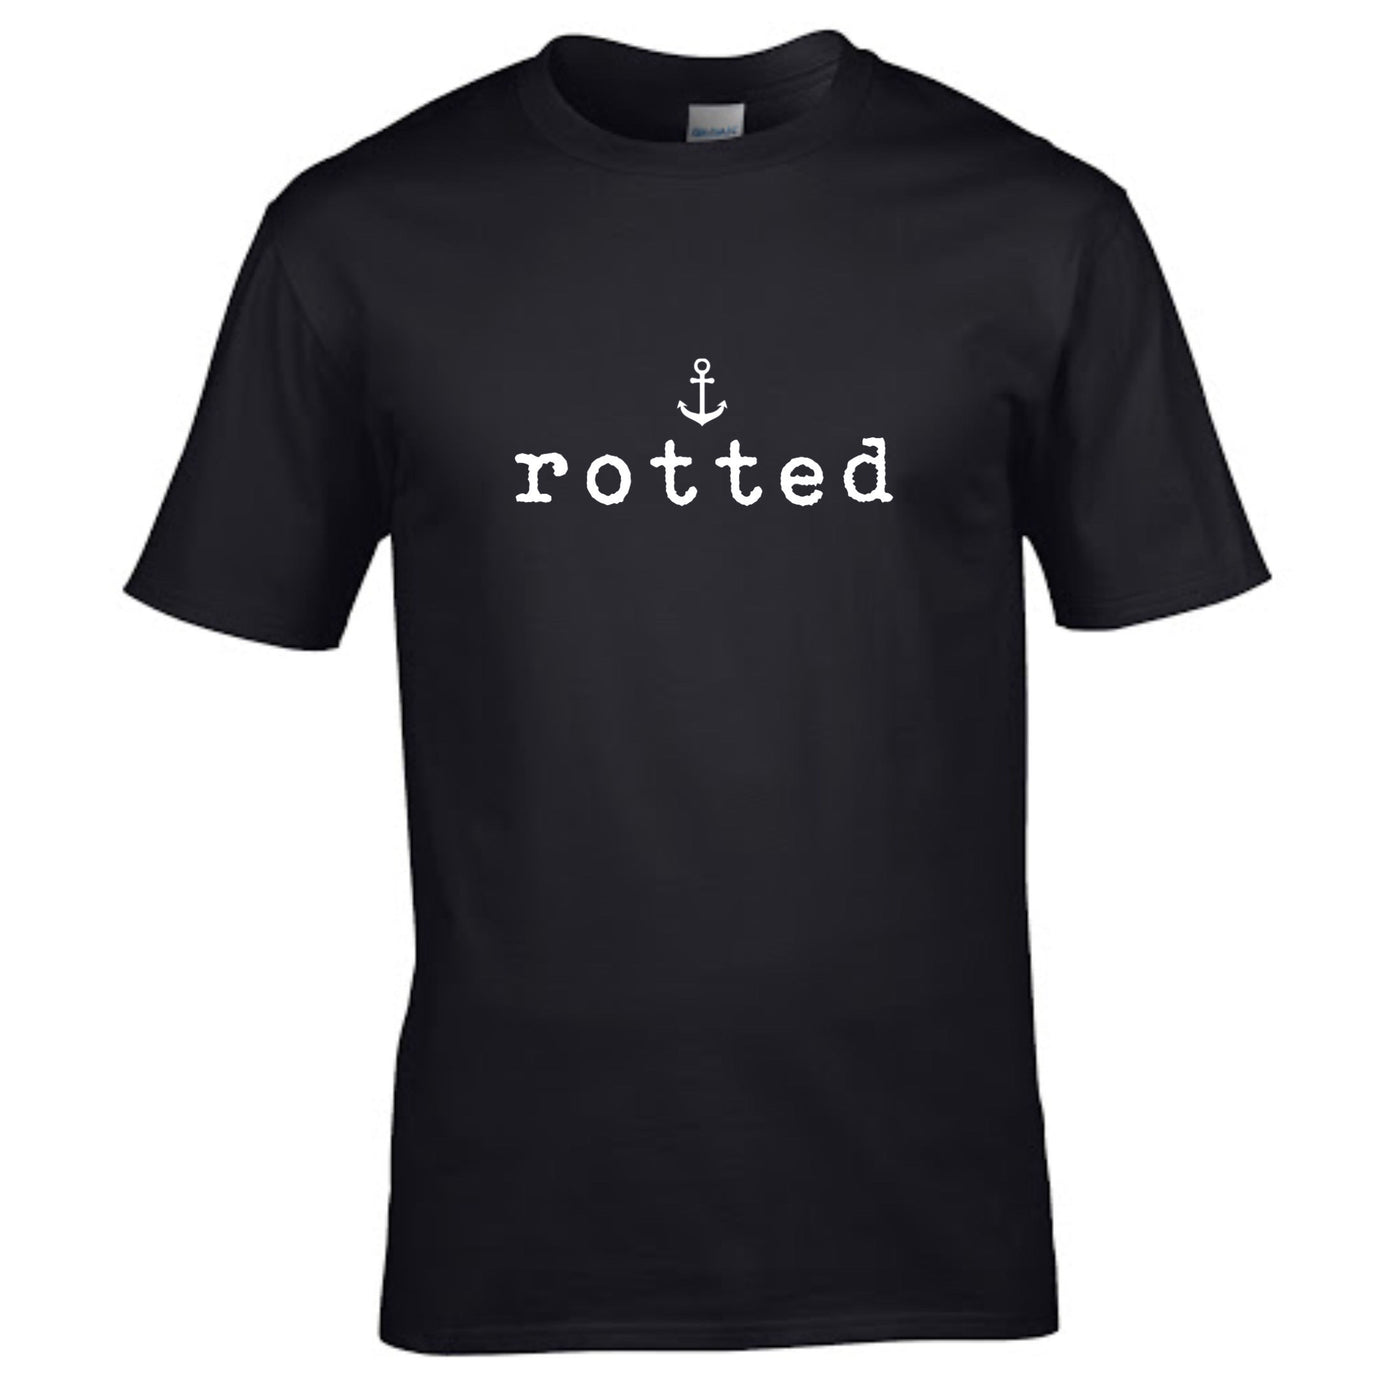 "Rotted" T-Shirt